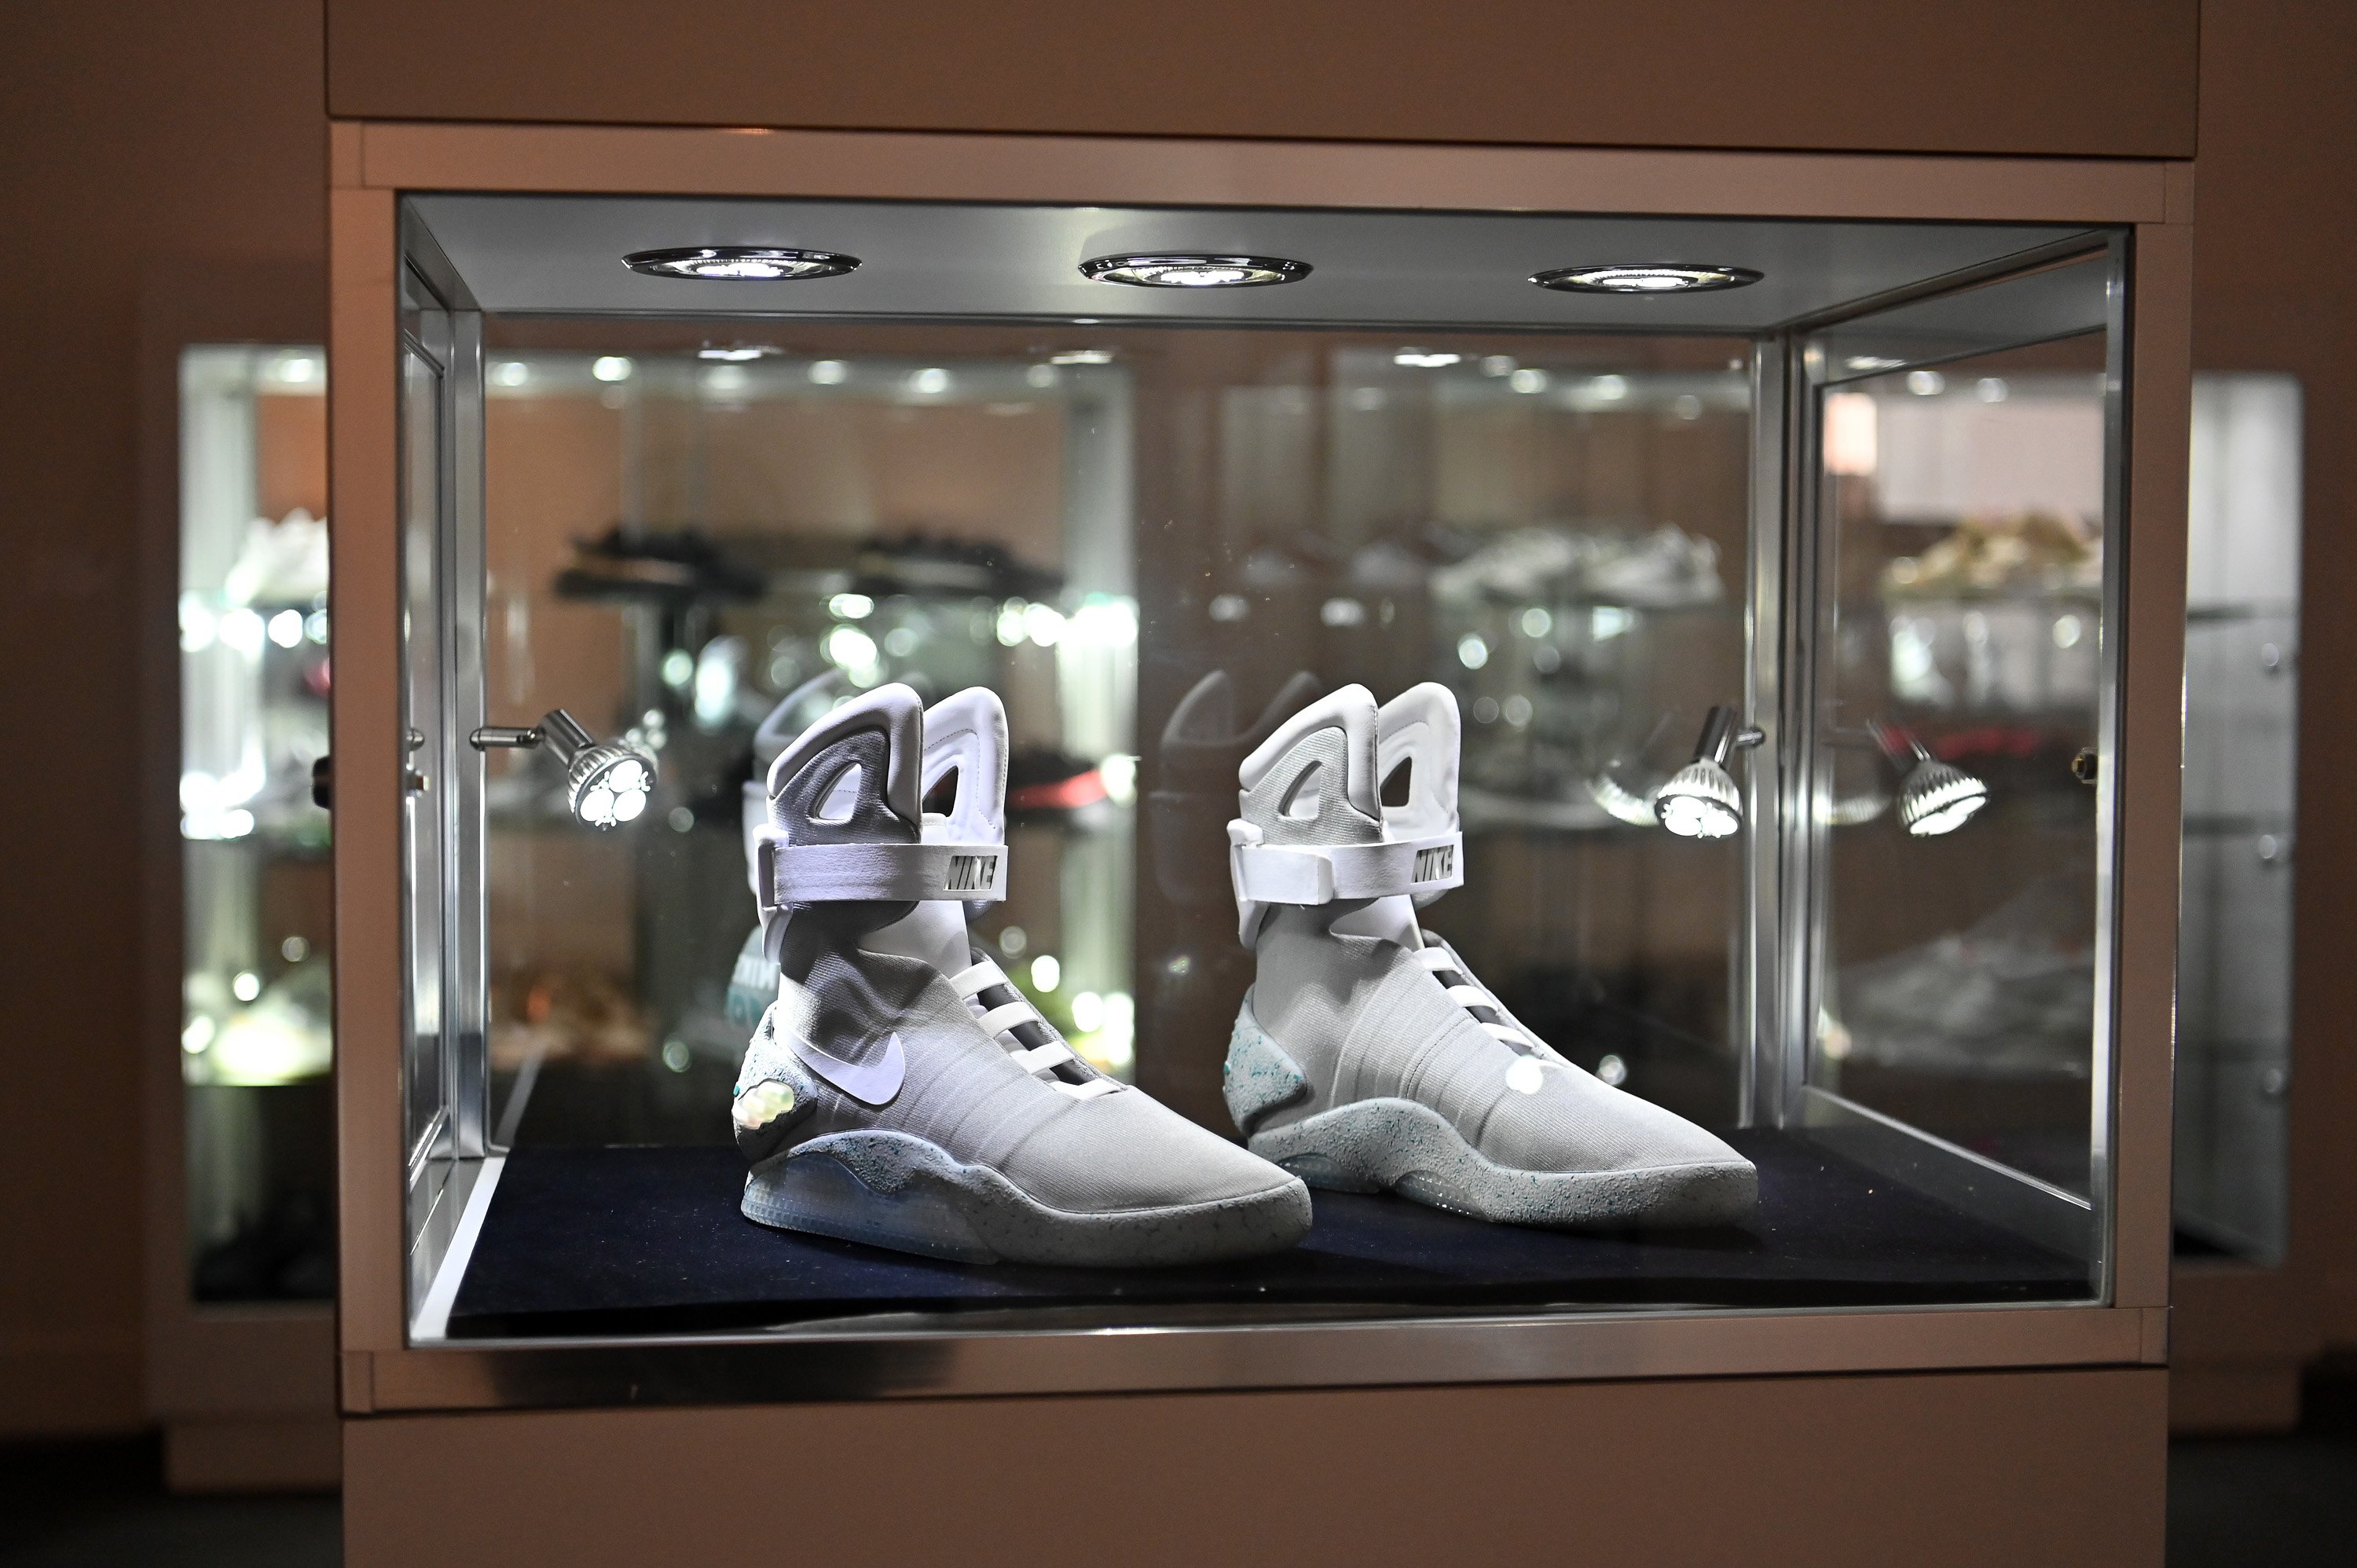 Snooze Demon revolution Sole-d to the Highest Bidder: A Canadian Businessman Buys 99 of World's  Rarest Sneakers at Sotheby's for $850,000